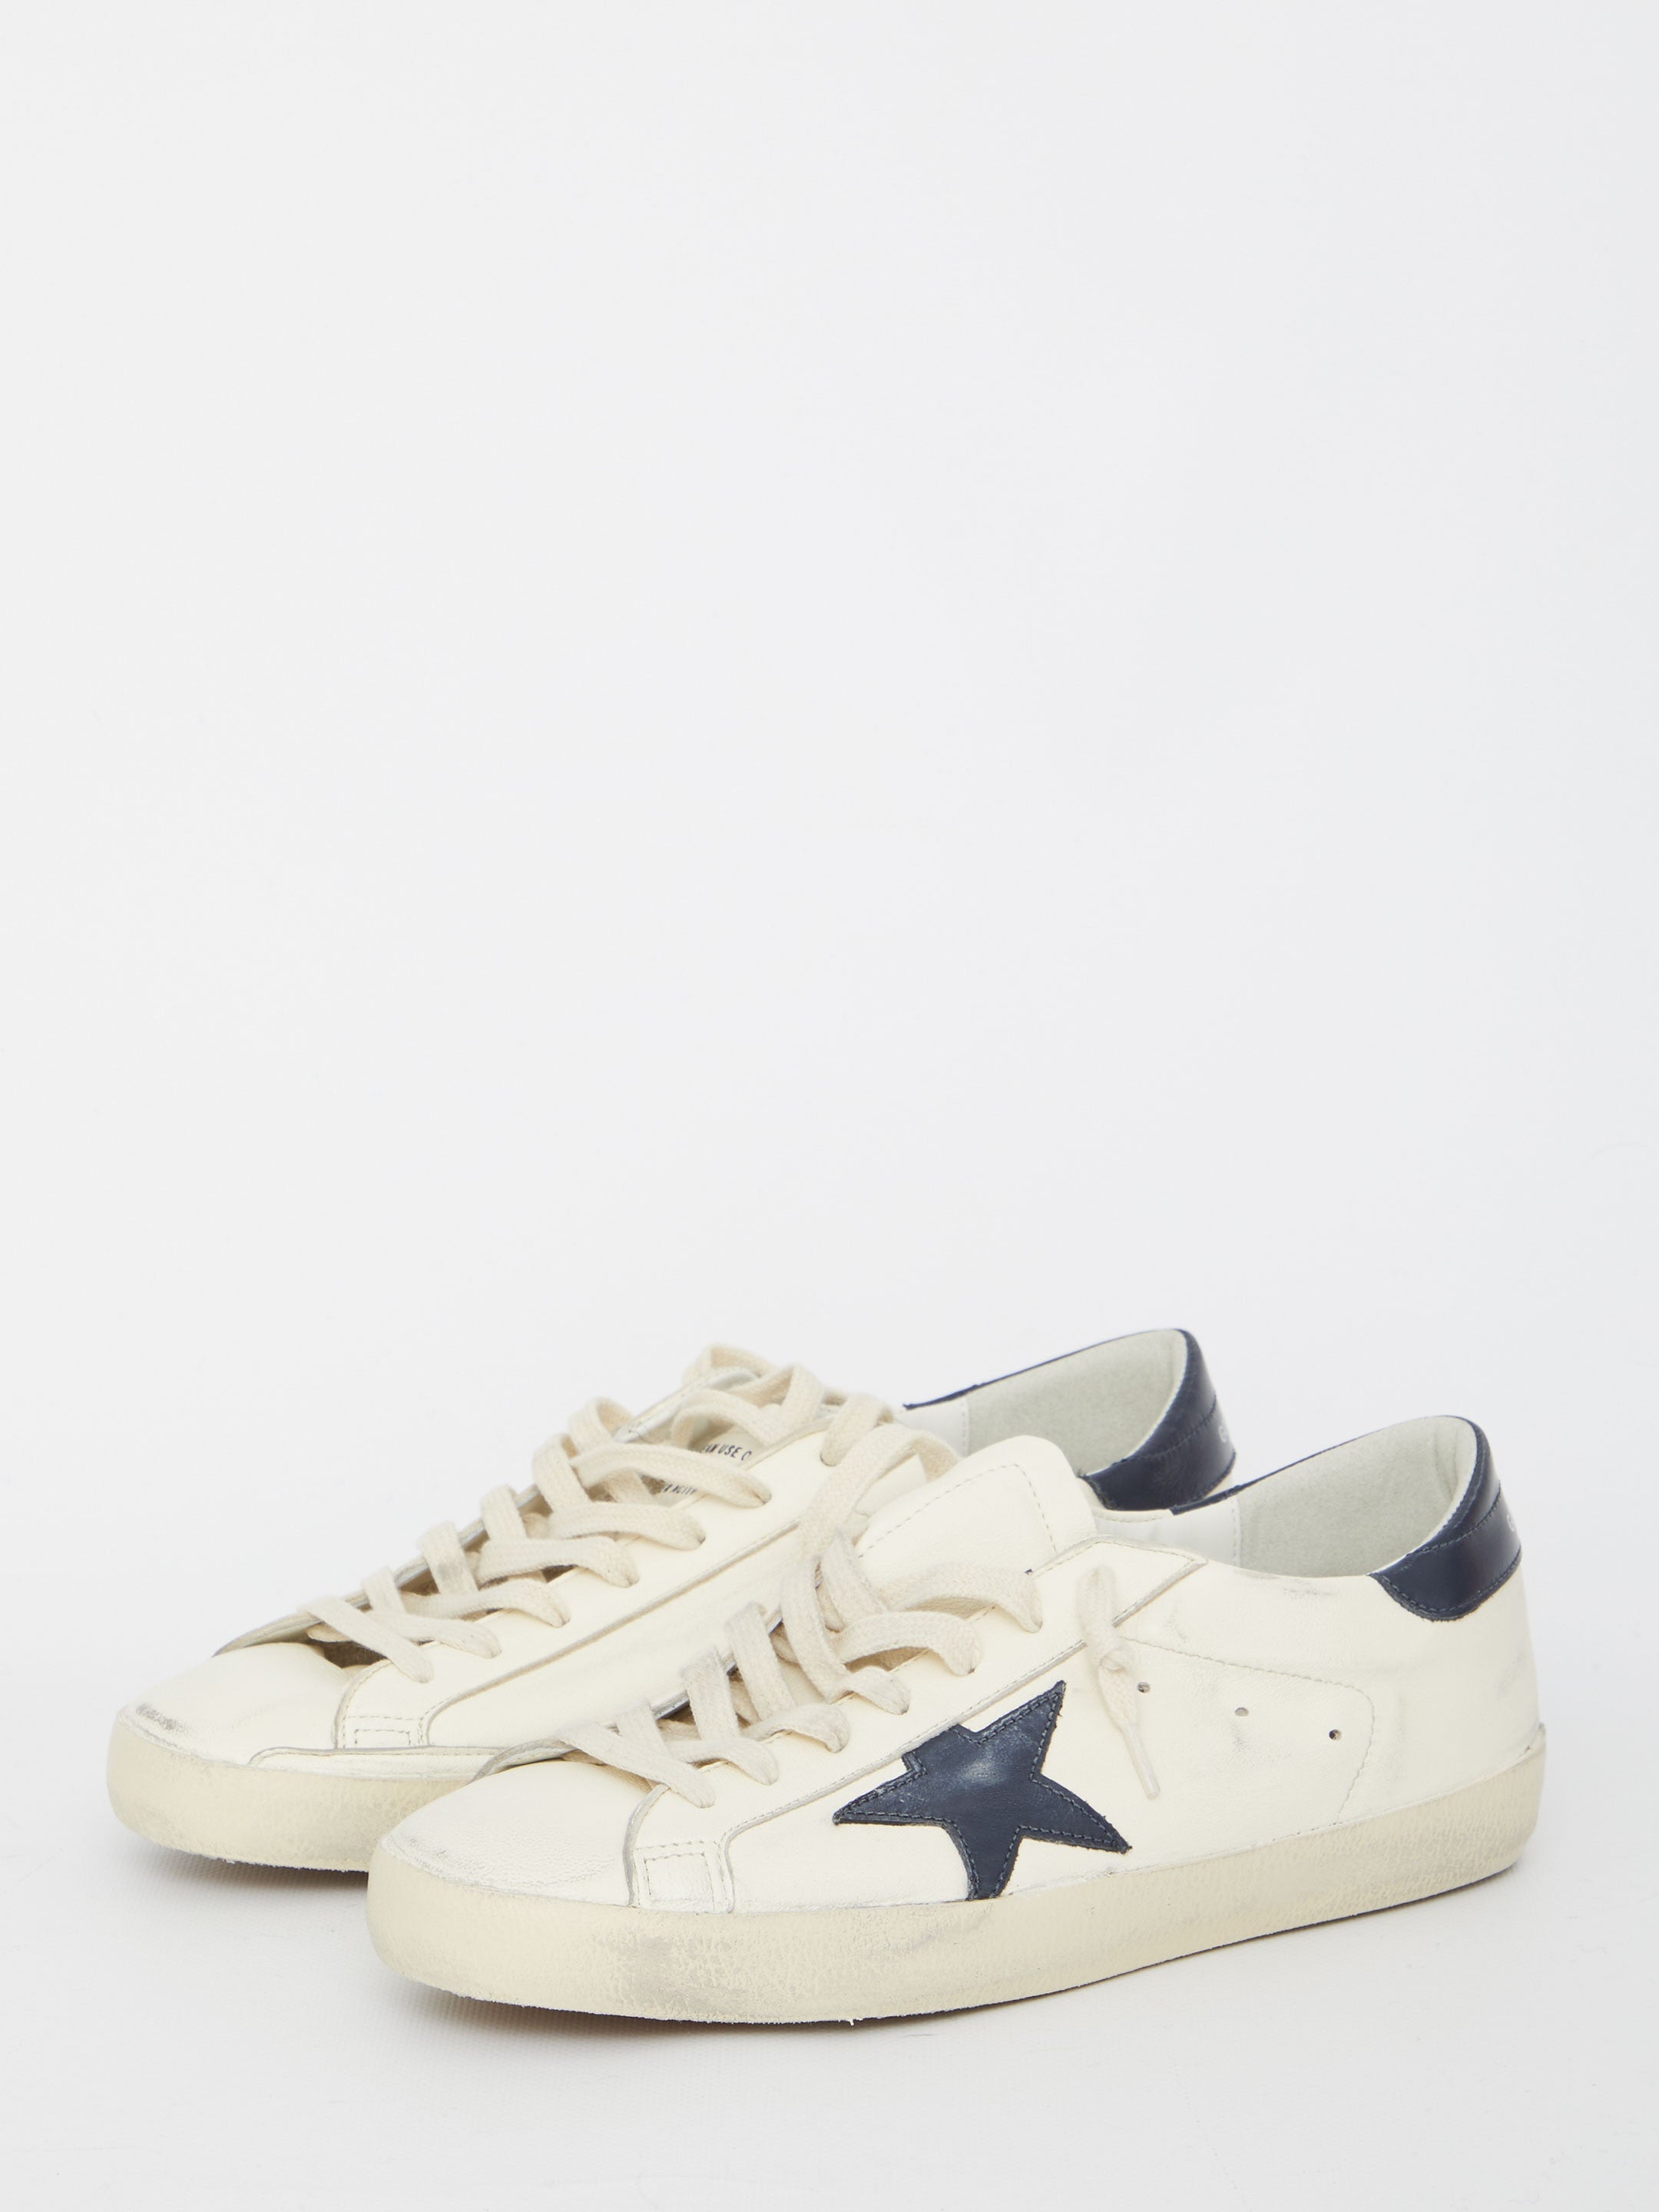 GOLDEN-GOOSE-OUTLET-SALE-Super-Star-sneakers-Sneakers-44-BEIGE-ARCHIVE-COLLECTION-2.jpg